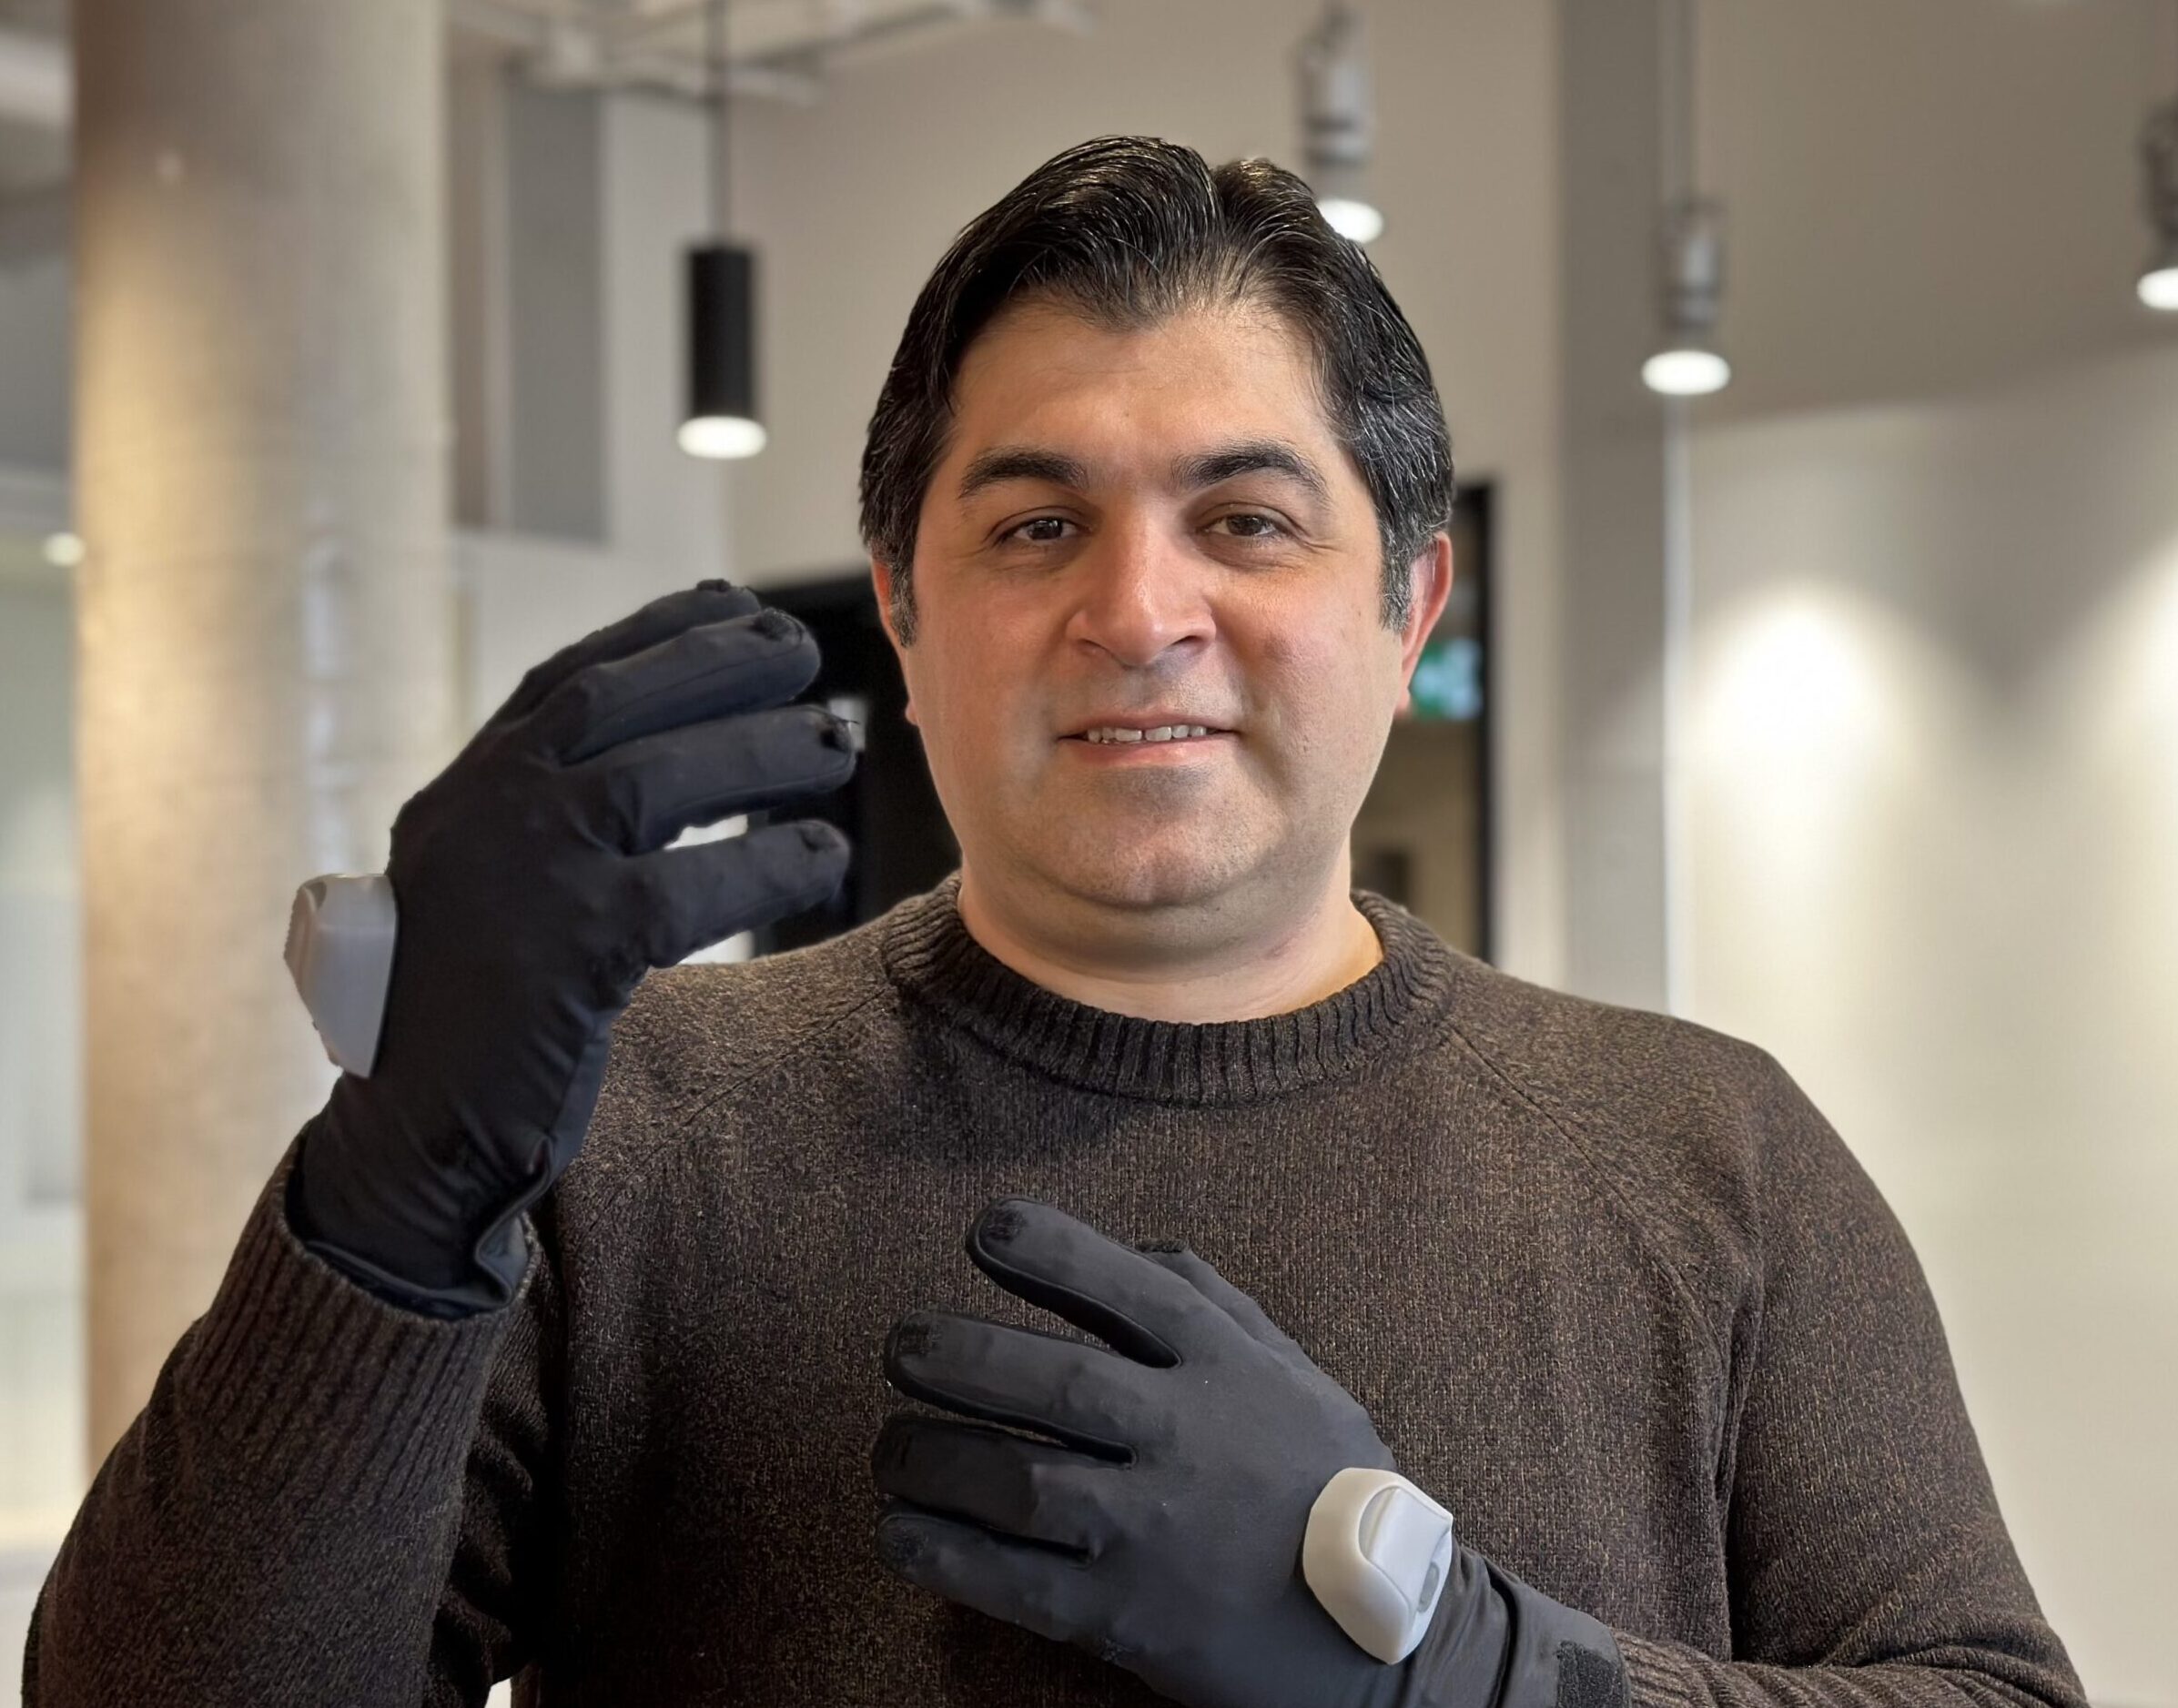 MarsWear Smart Gloves Will Power New Consumer and Remote Health Applications